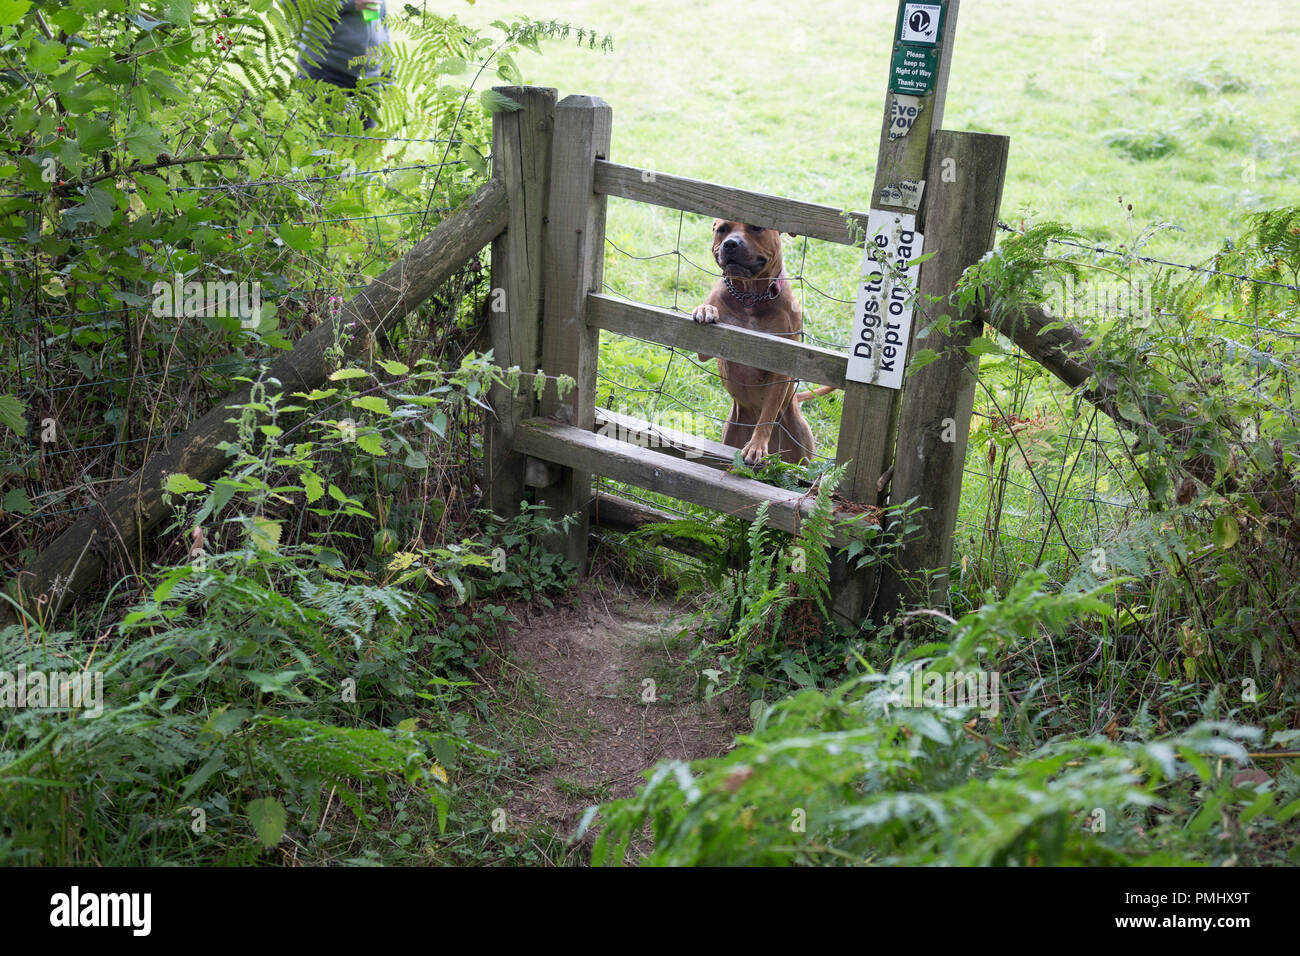 A Staffordshire Bull Terrier on a long lead peers through the wire of a stile in the English countryside, on 10th September 2018, near Lingen, Herefordshire, England UK. Before entering the field where sheep are grazing, all dogs are required to be on leads to avoid sheep worrying which can result in prosecution by irresponsible dog owners. Stock Photo